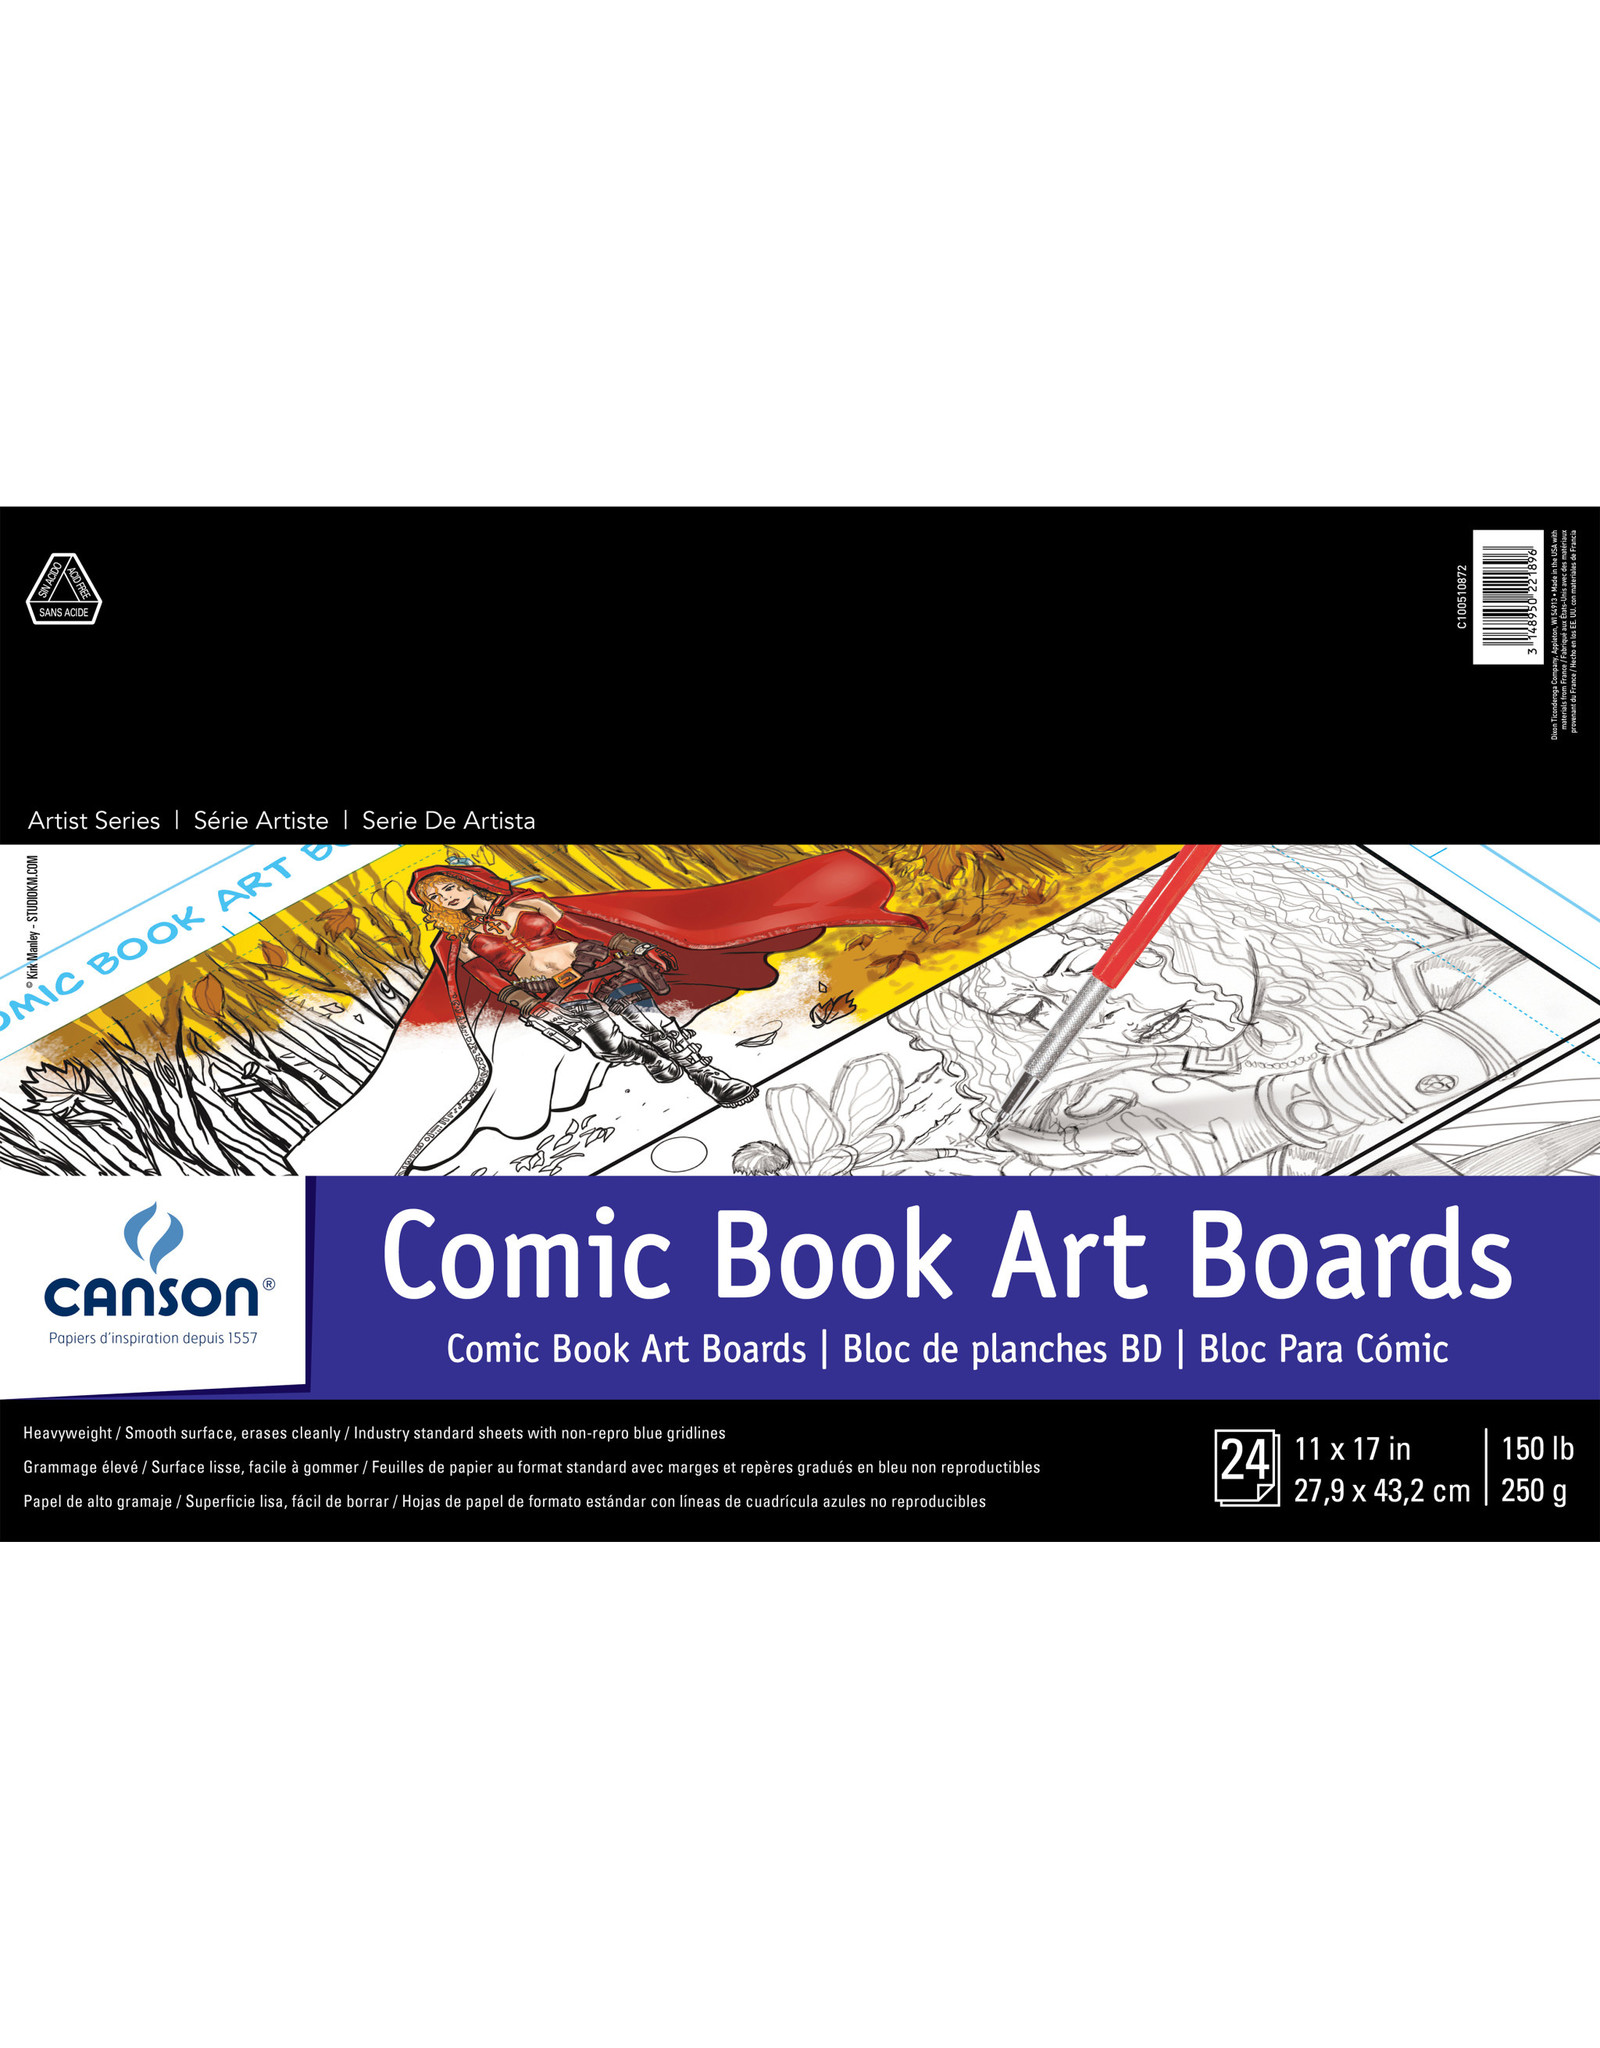 Canson Canson Artist Series Comic Book Art Boards, 11" x 17", 24 Sheets